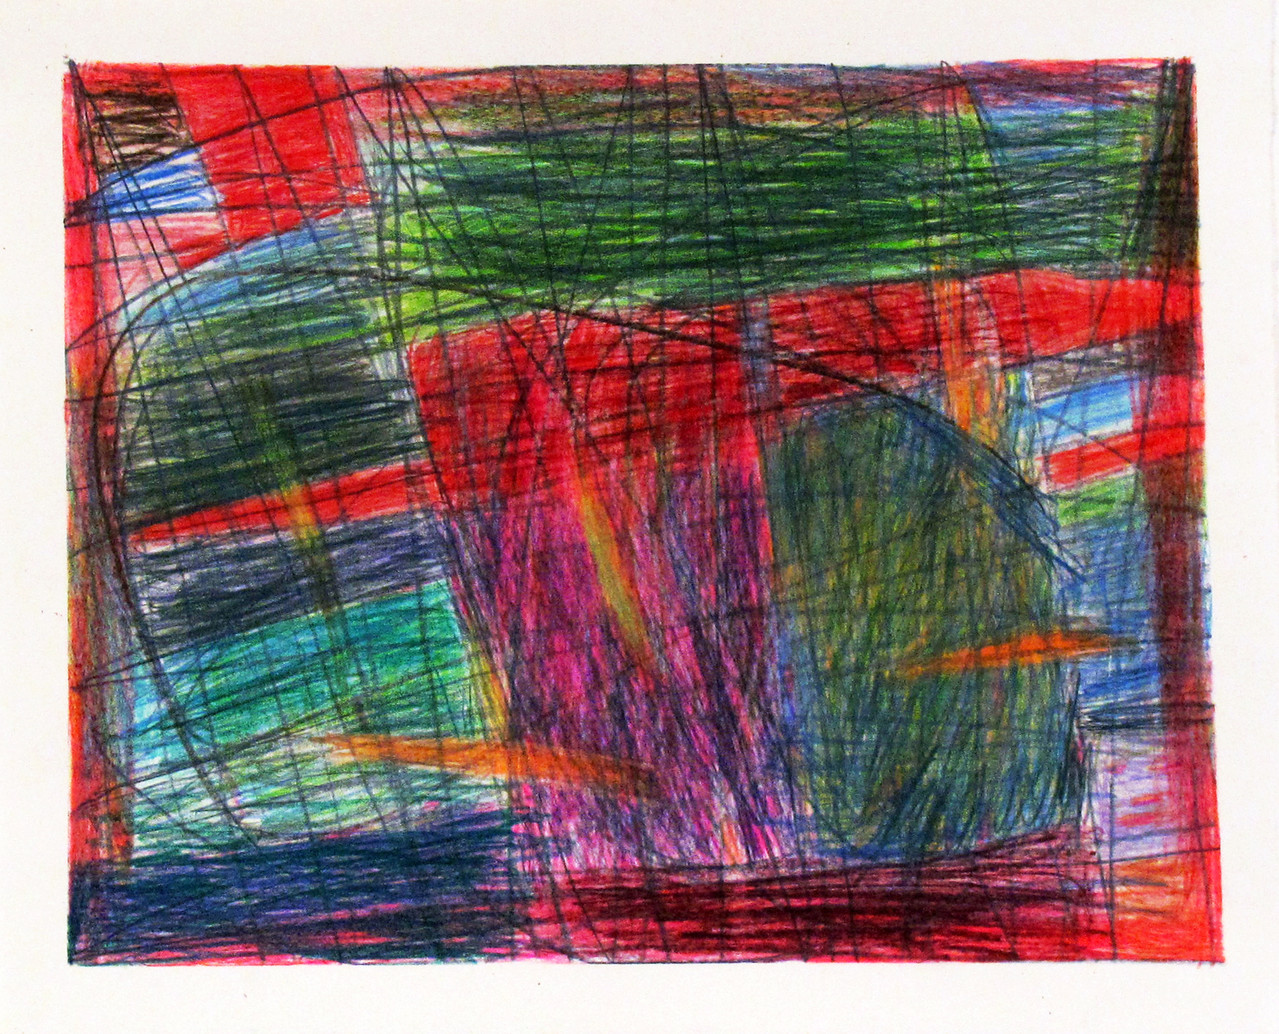 Untitled, 1988, Colored pencil and graphite on paper, 38.7 x 47 cm, BS 009